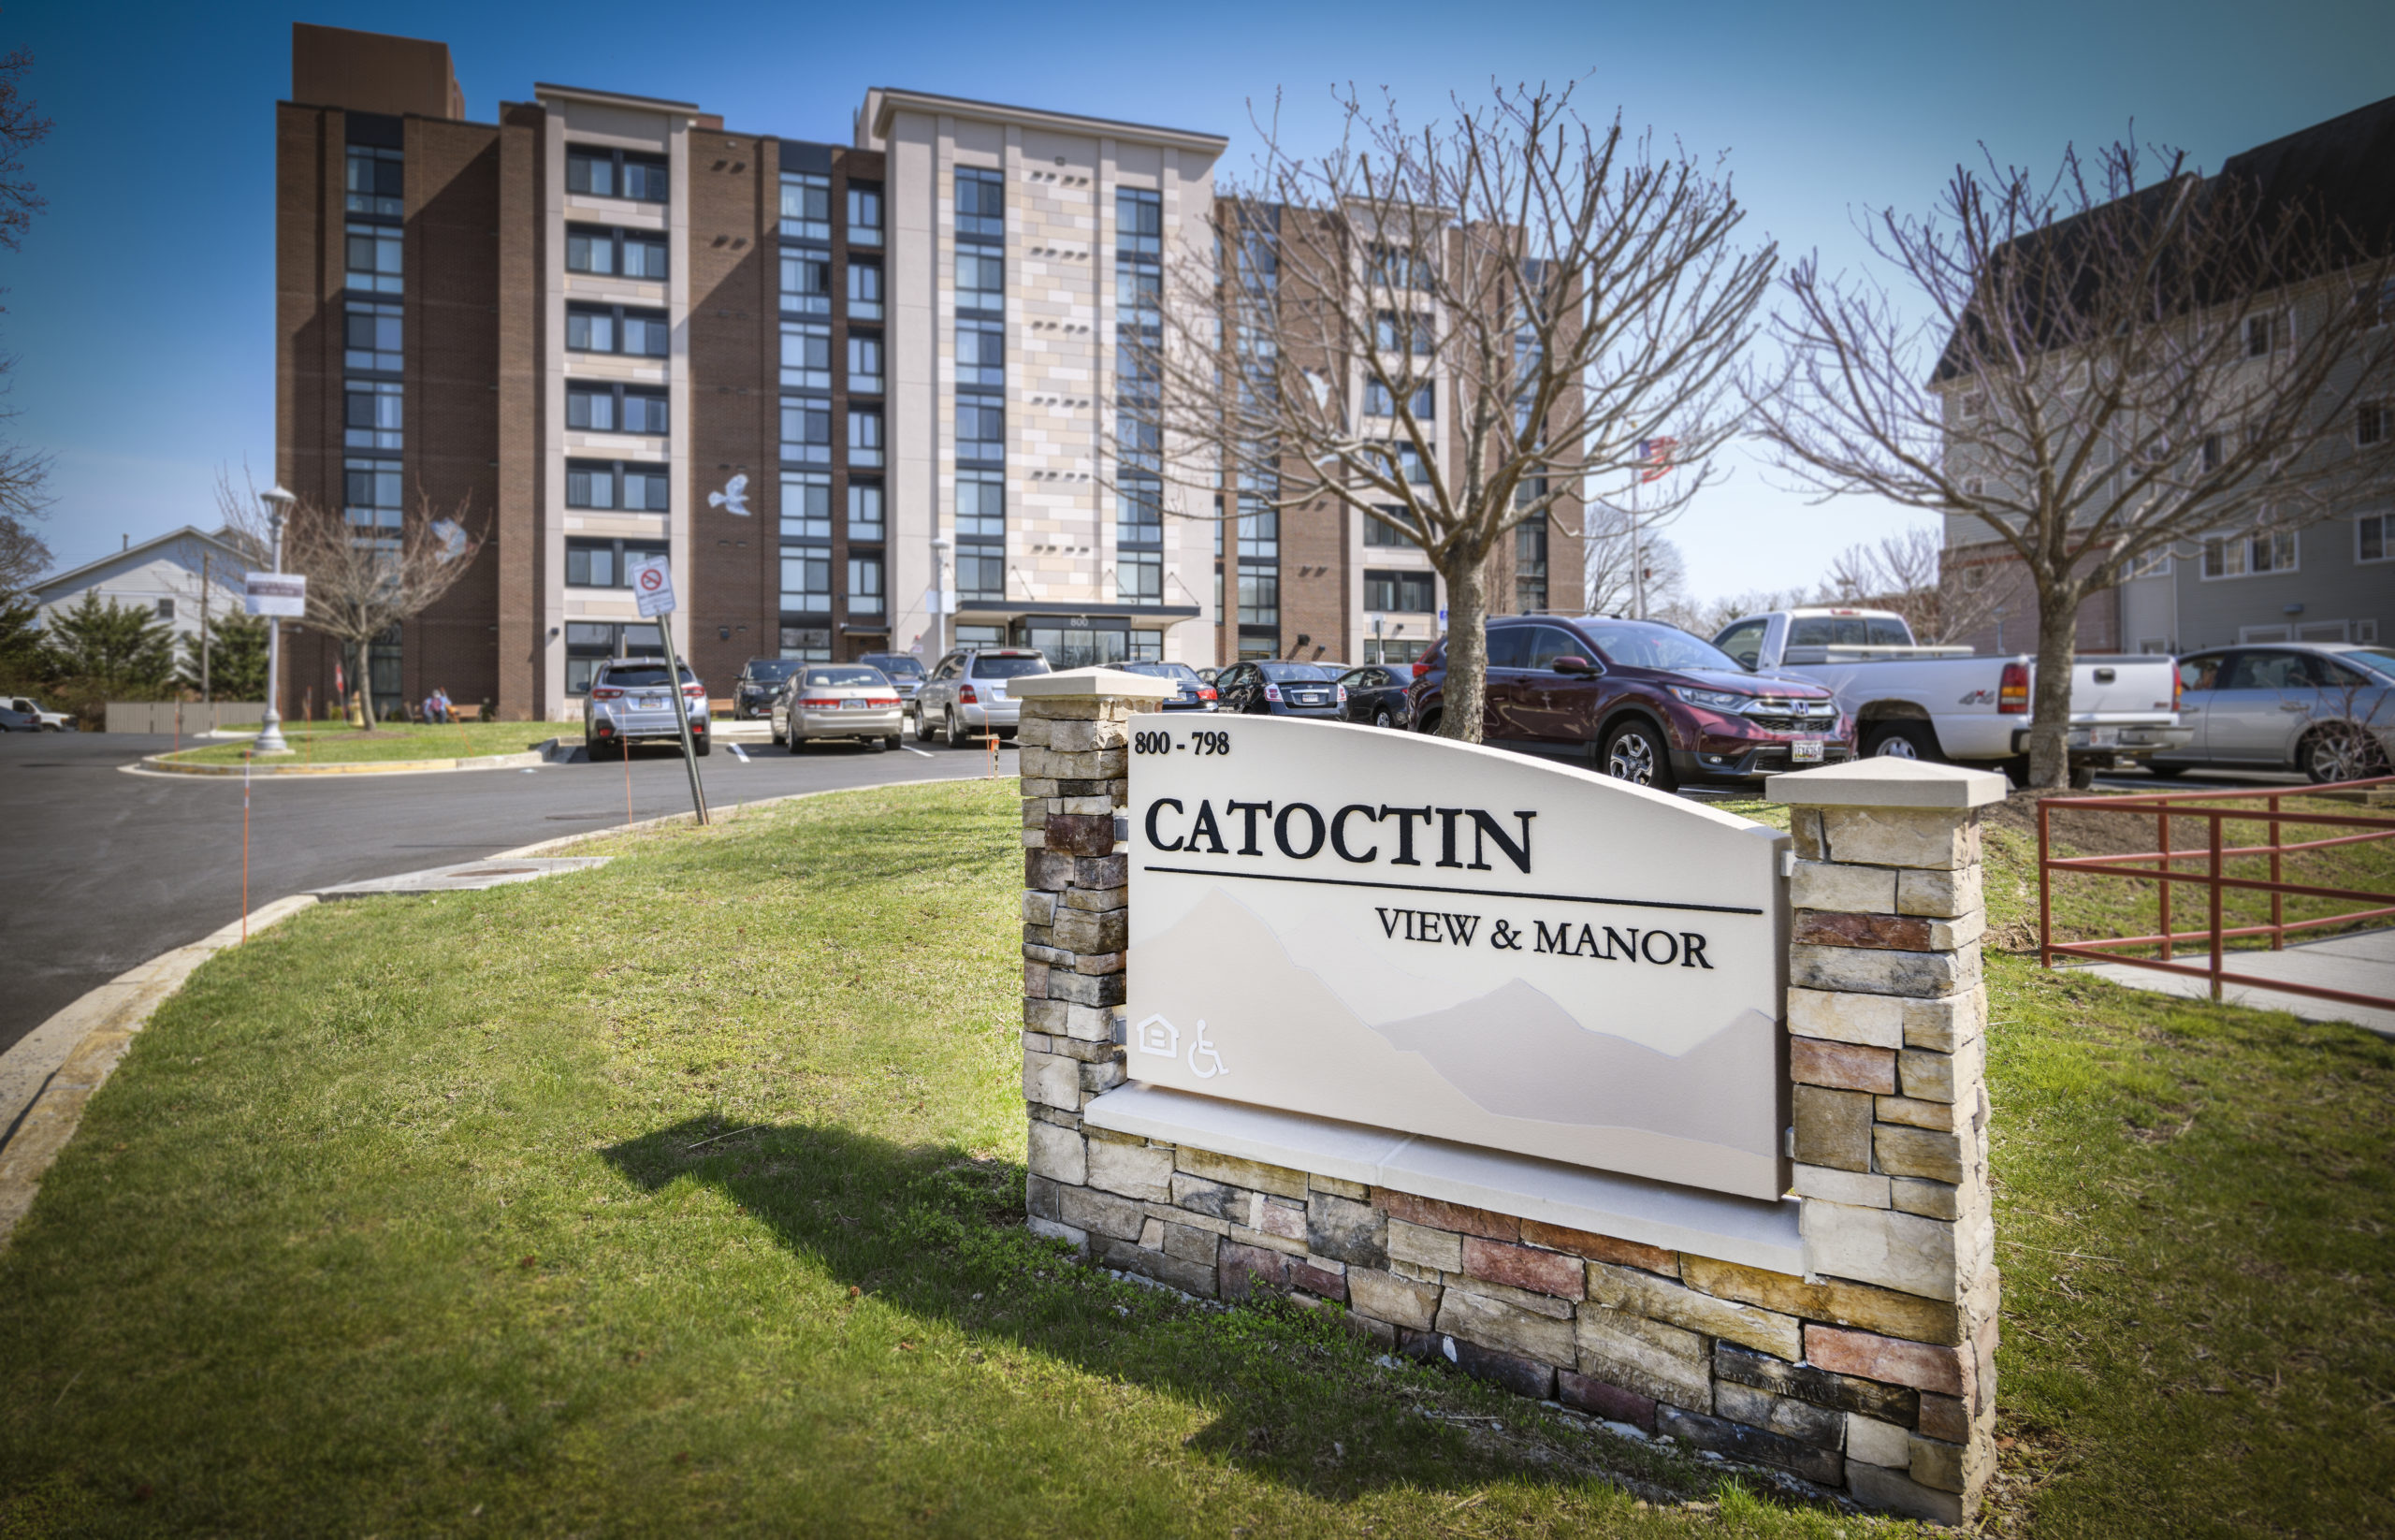 Cacotin_Apartments-30